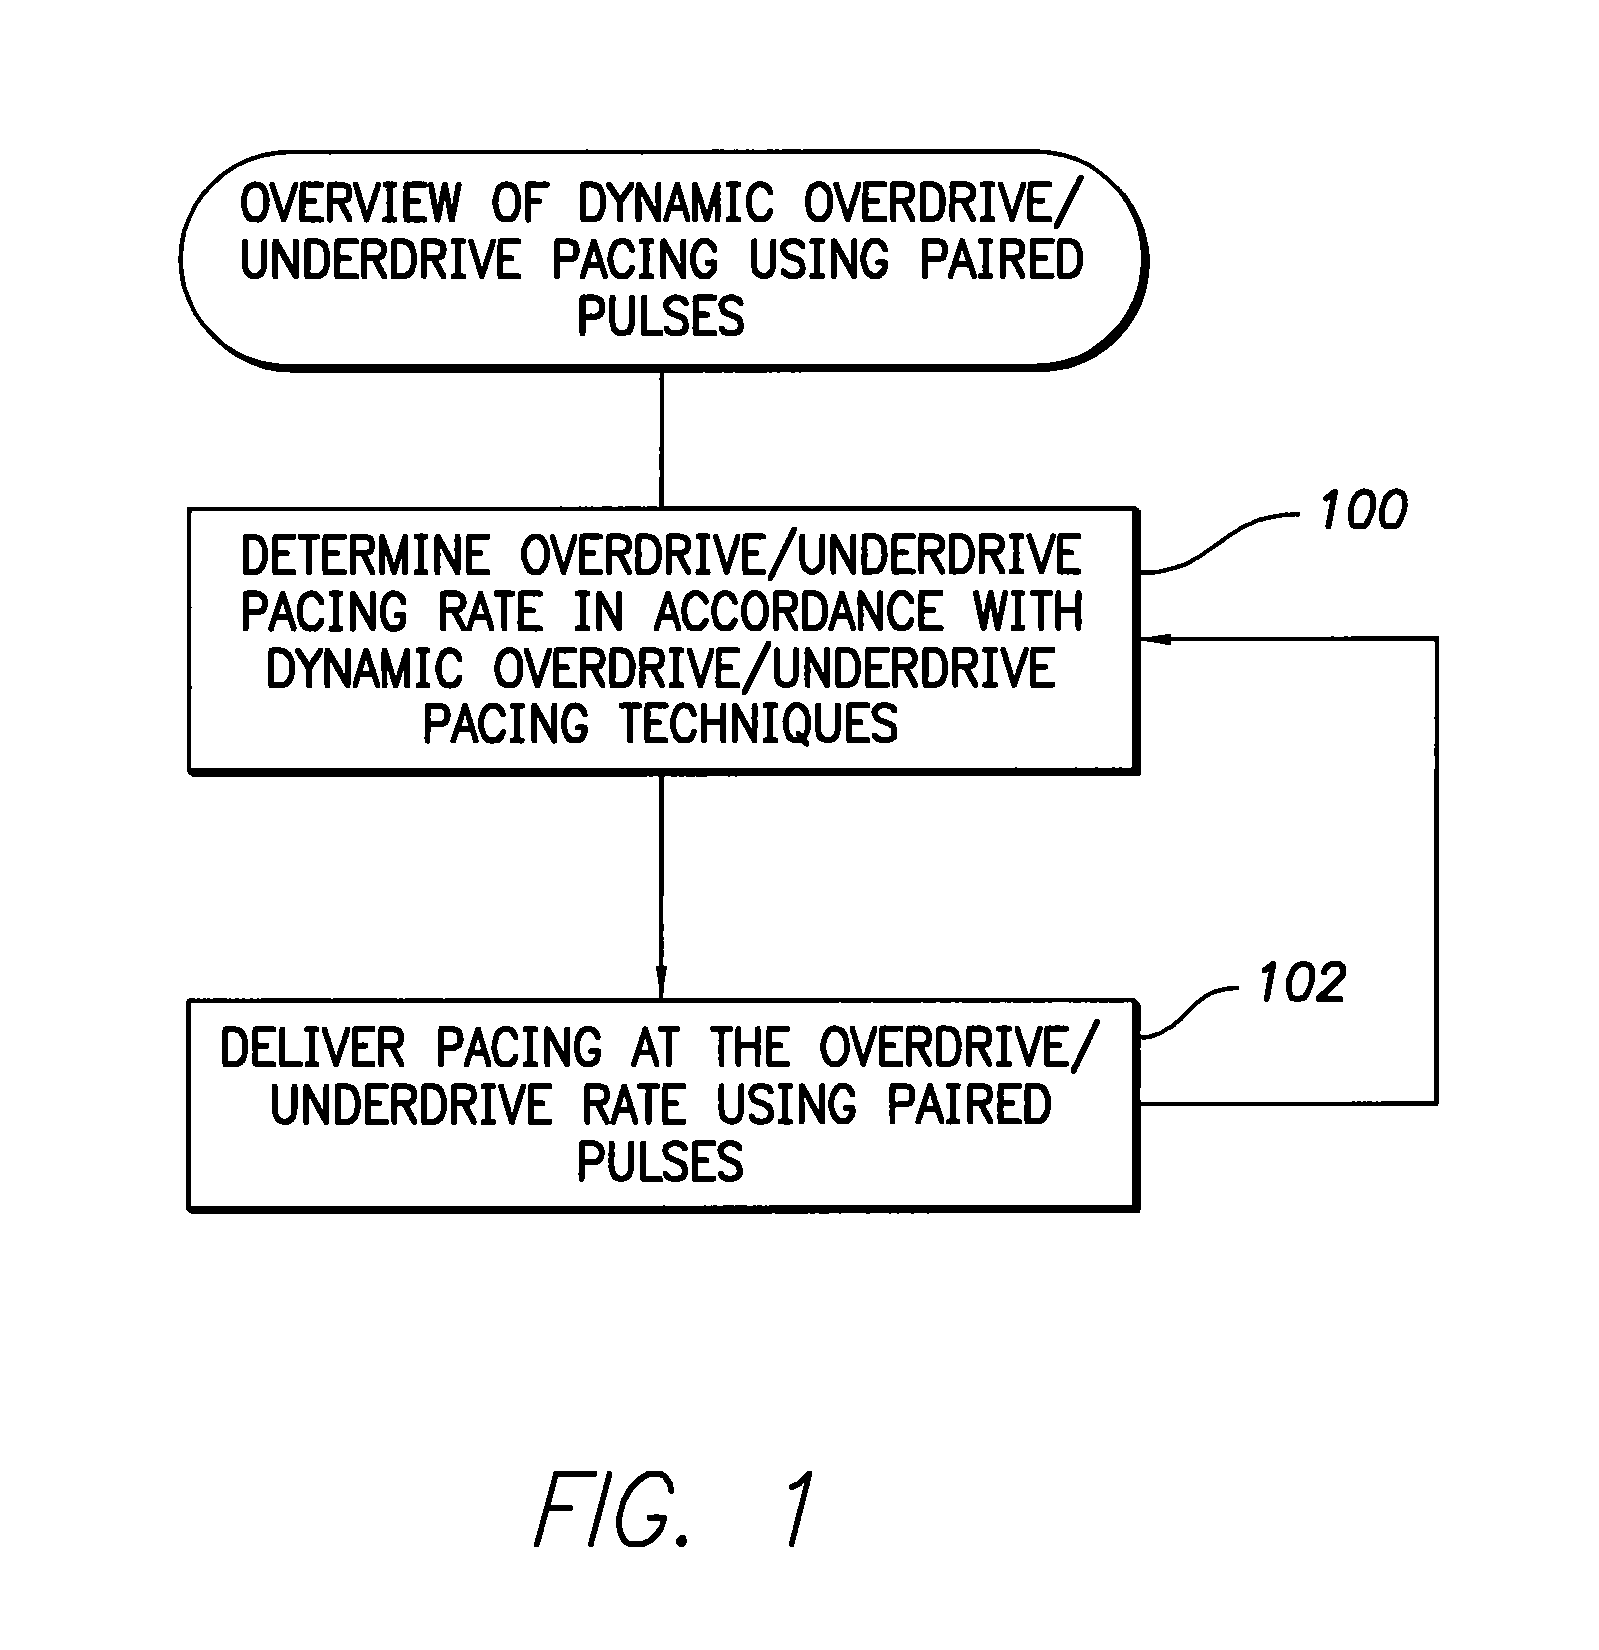 Systems and methods for paired/coupled pacing and dynamic overdrive/underdrive pacing